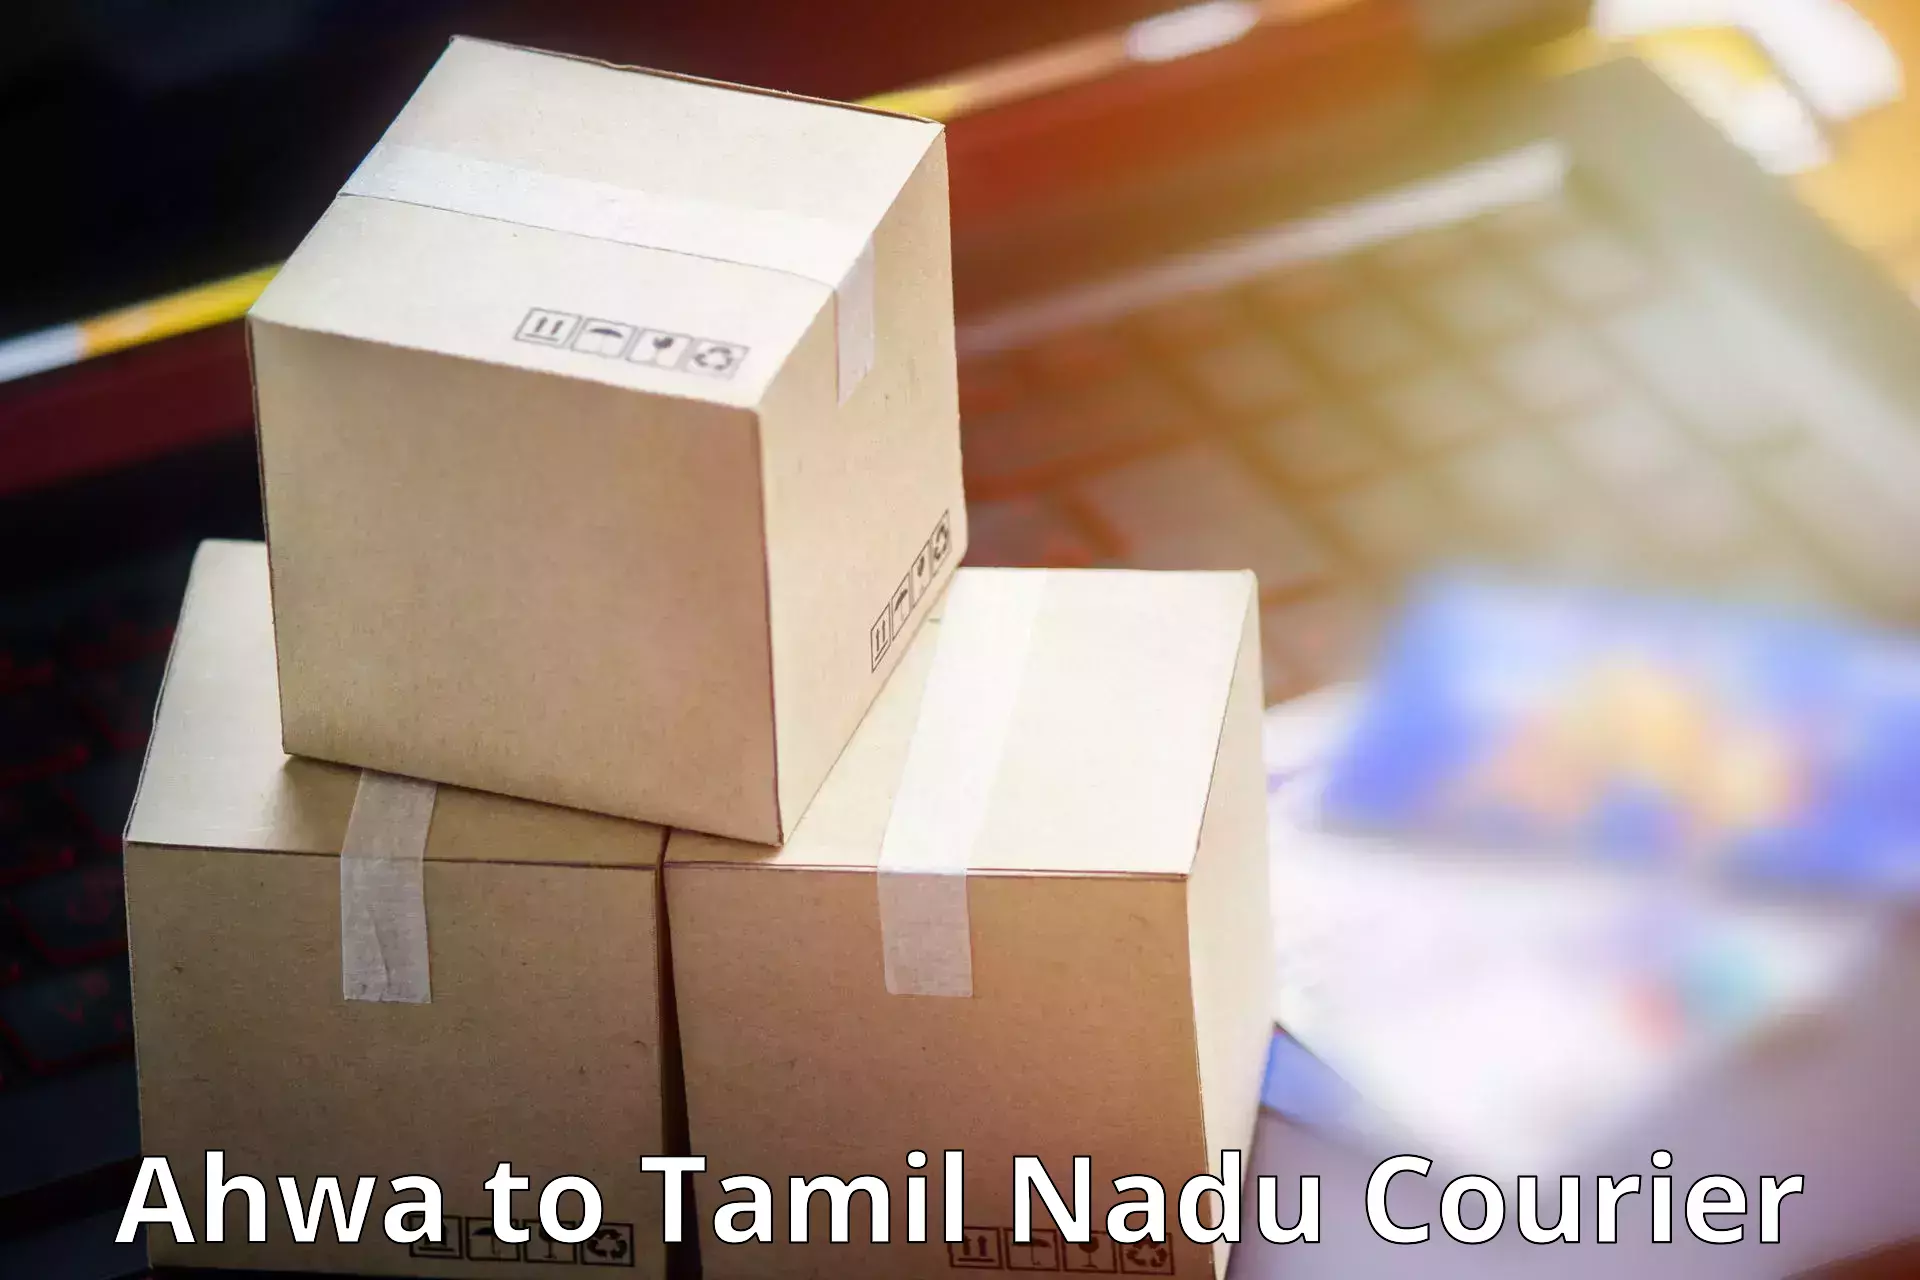 Optimized shipping services Ahwa to Karur